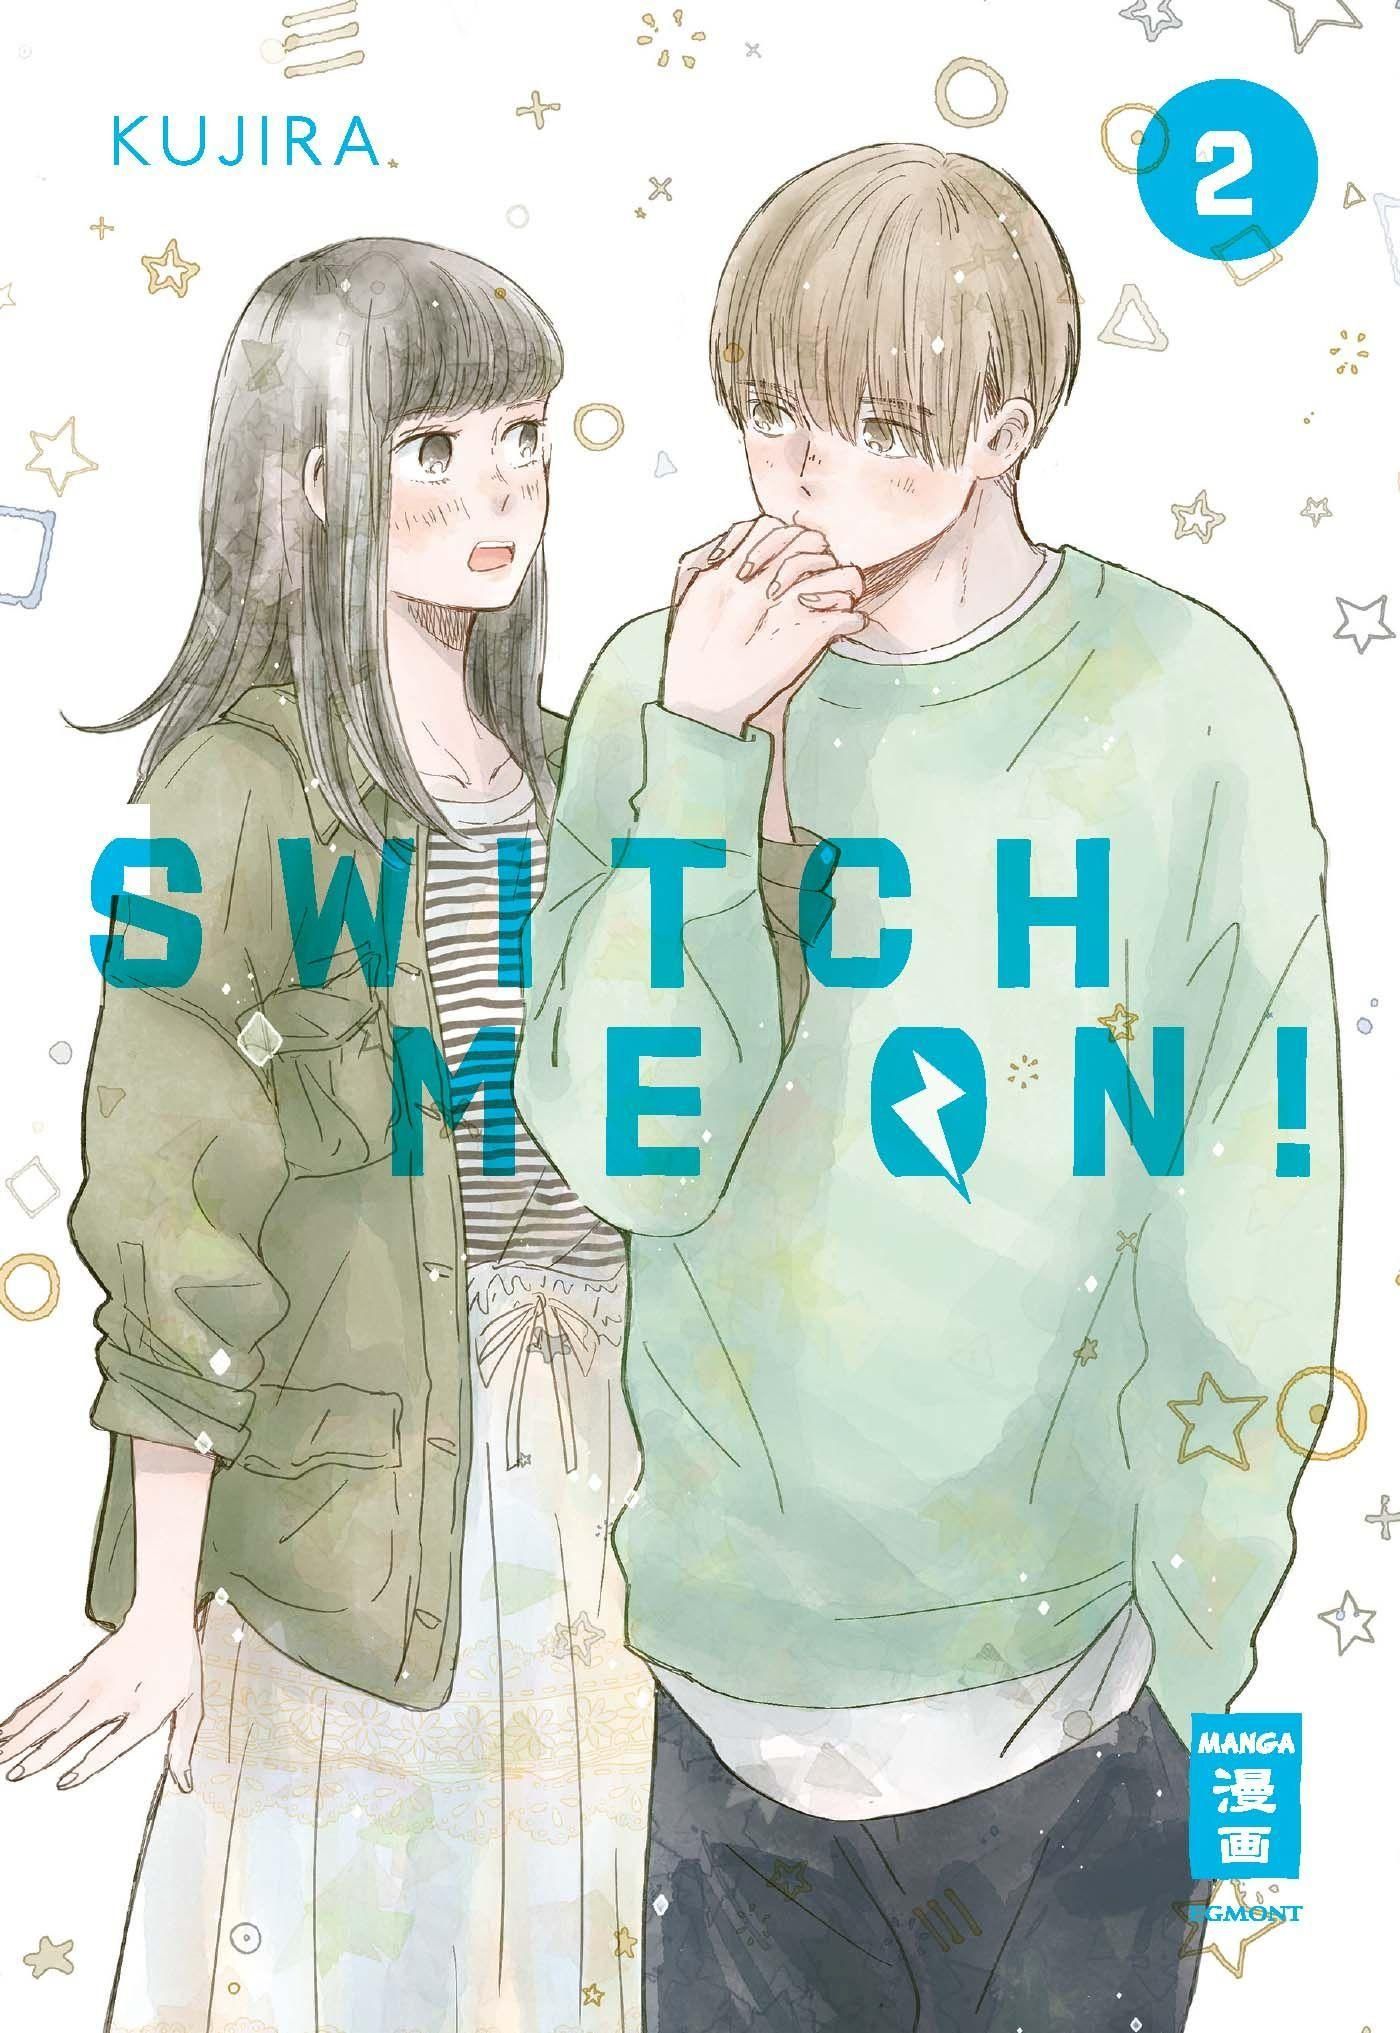 Switch me on!